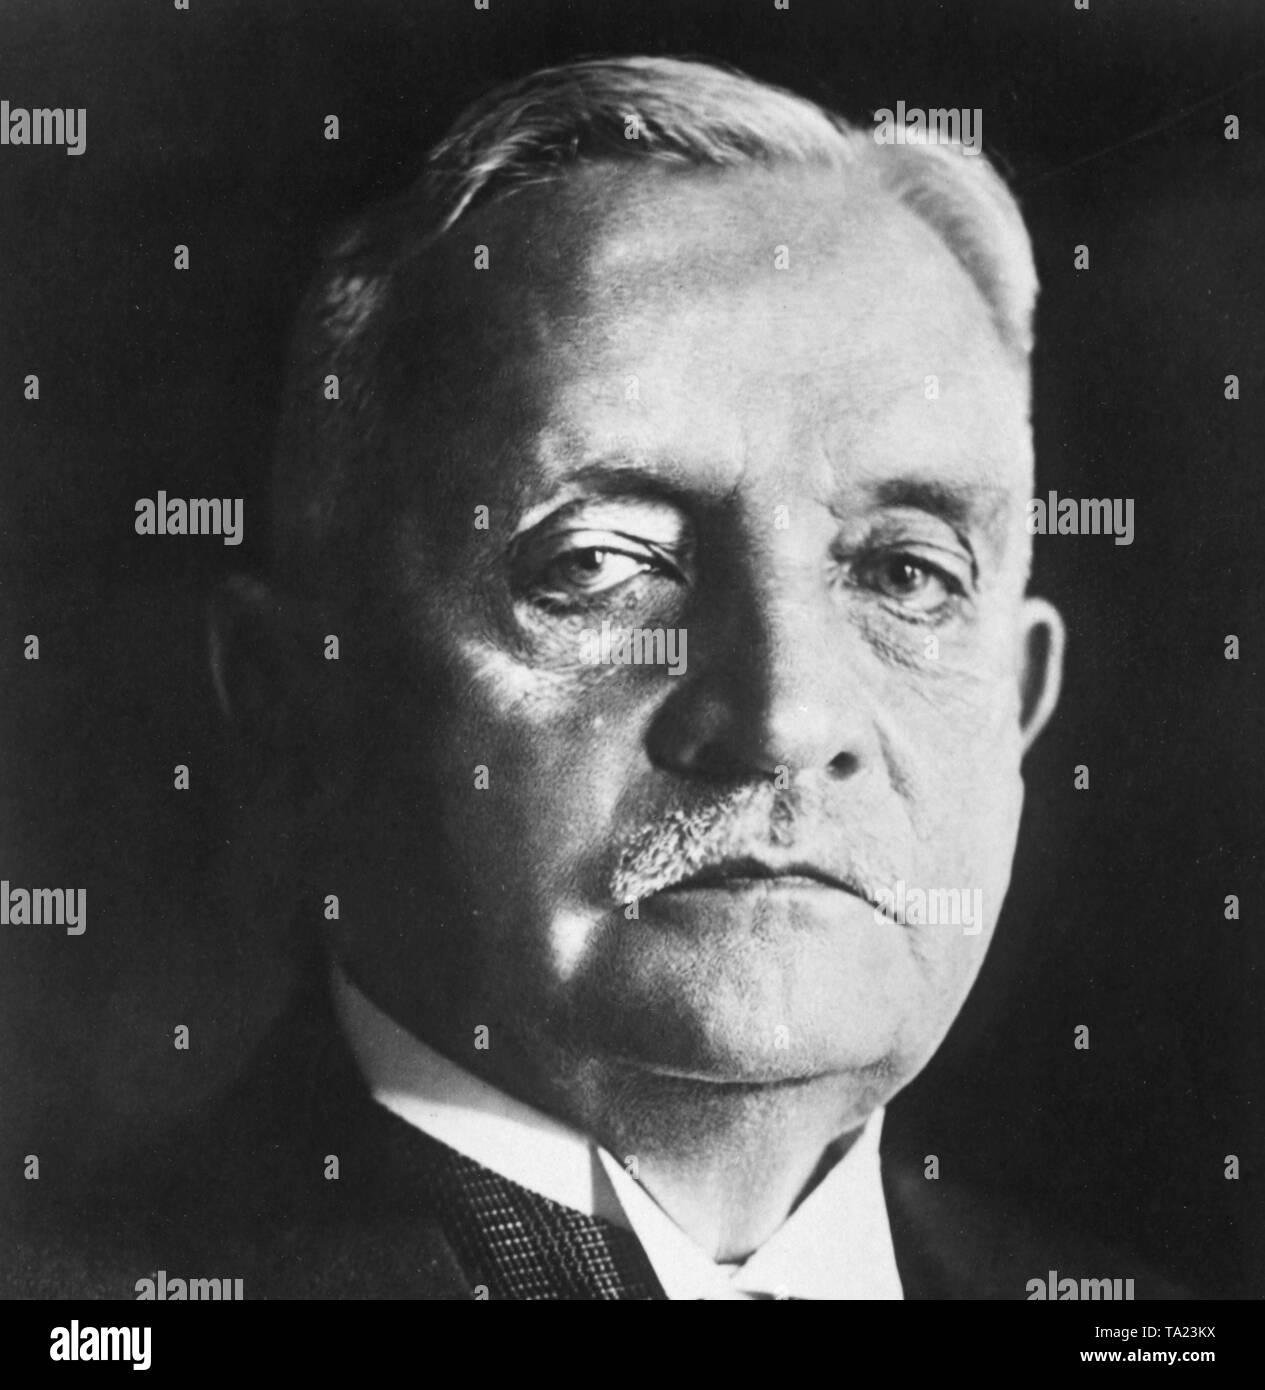 In the wake of the Great Depression, President Hindenburg appointed together an Economic Advisory Council at the suggestion of the Chancellor. The picture shows the agricultural politician and chairman of the German Agriculture Council, Dr. Ernst Brande. Stock Photo